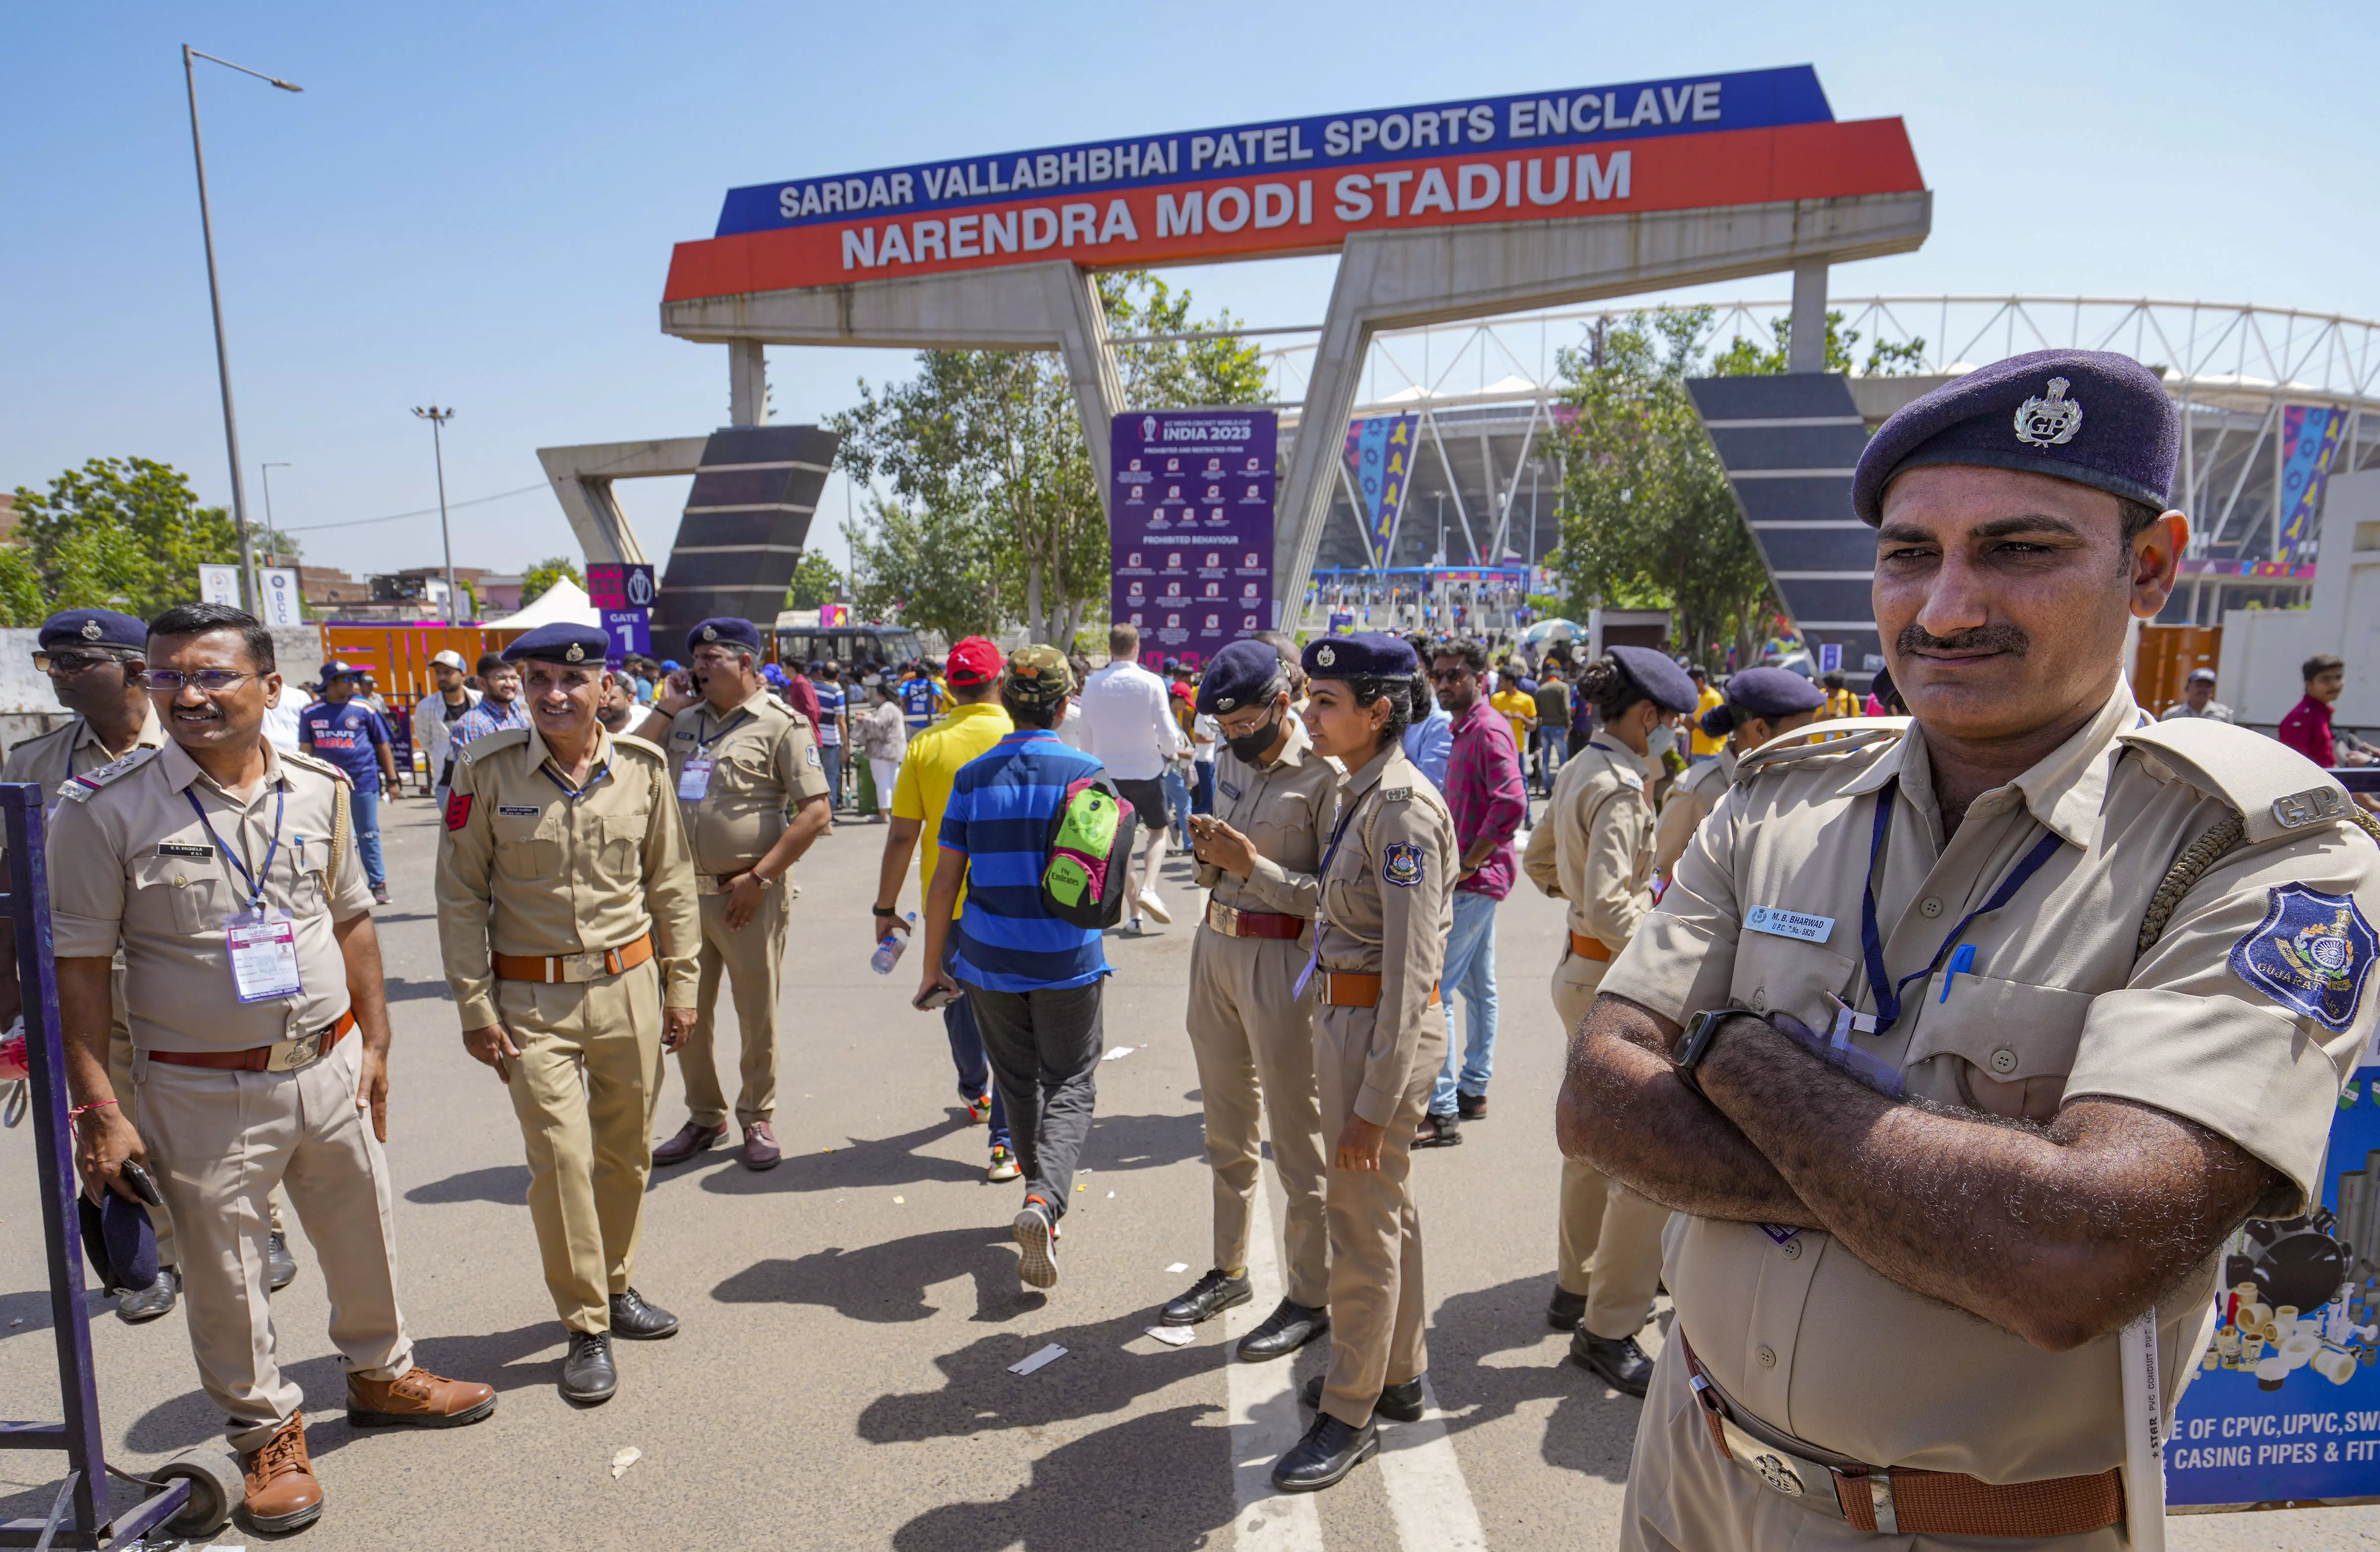 High Alert: Gujarat Police Mobilizes 6,000 Officers for India-Pakistan Match in Ahmedabad